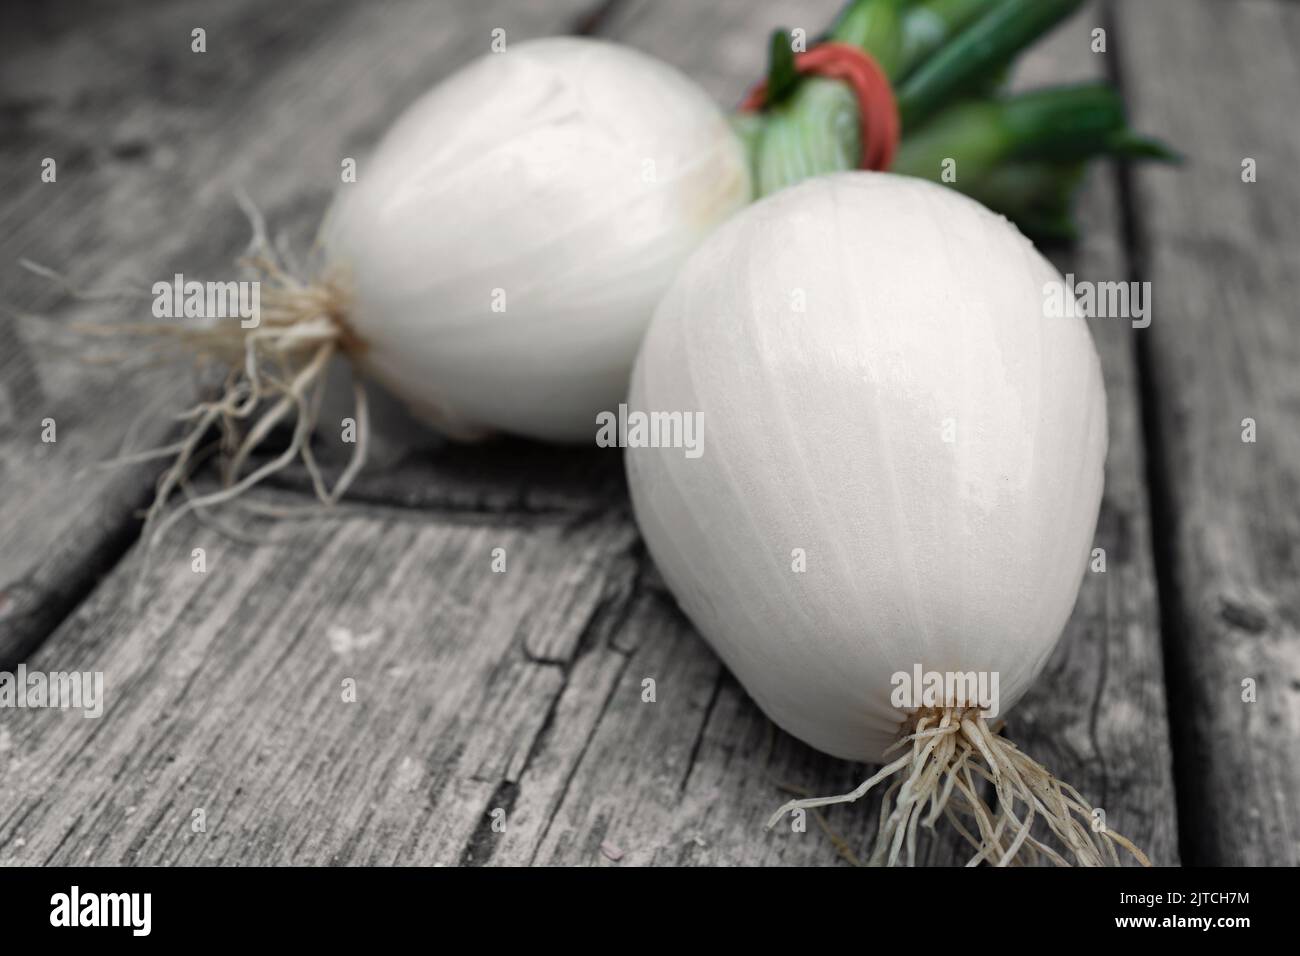 Two Spring Onions on Wood Table Stock Photo